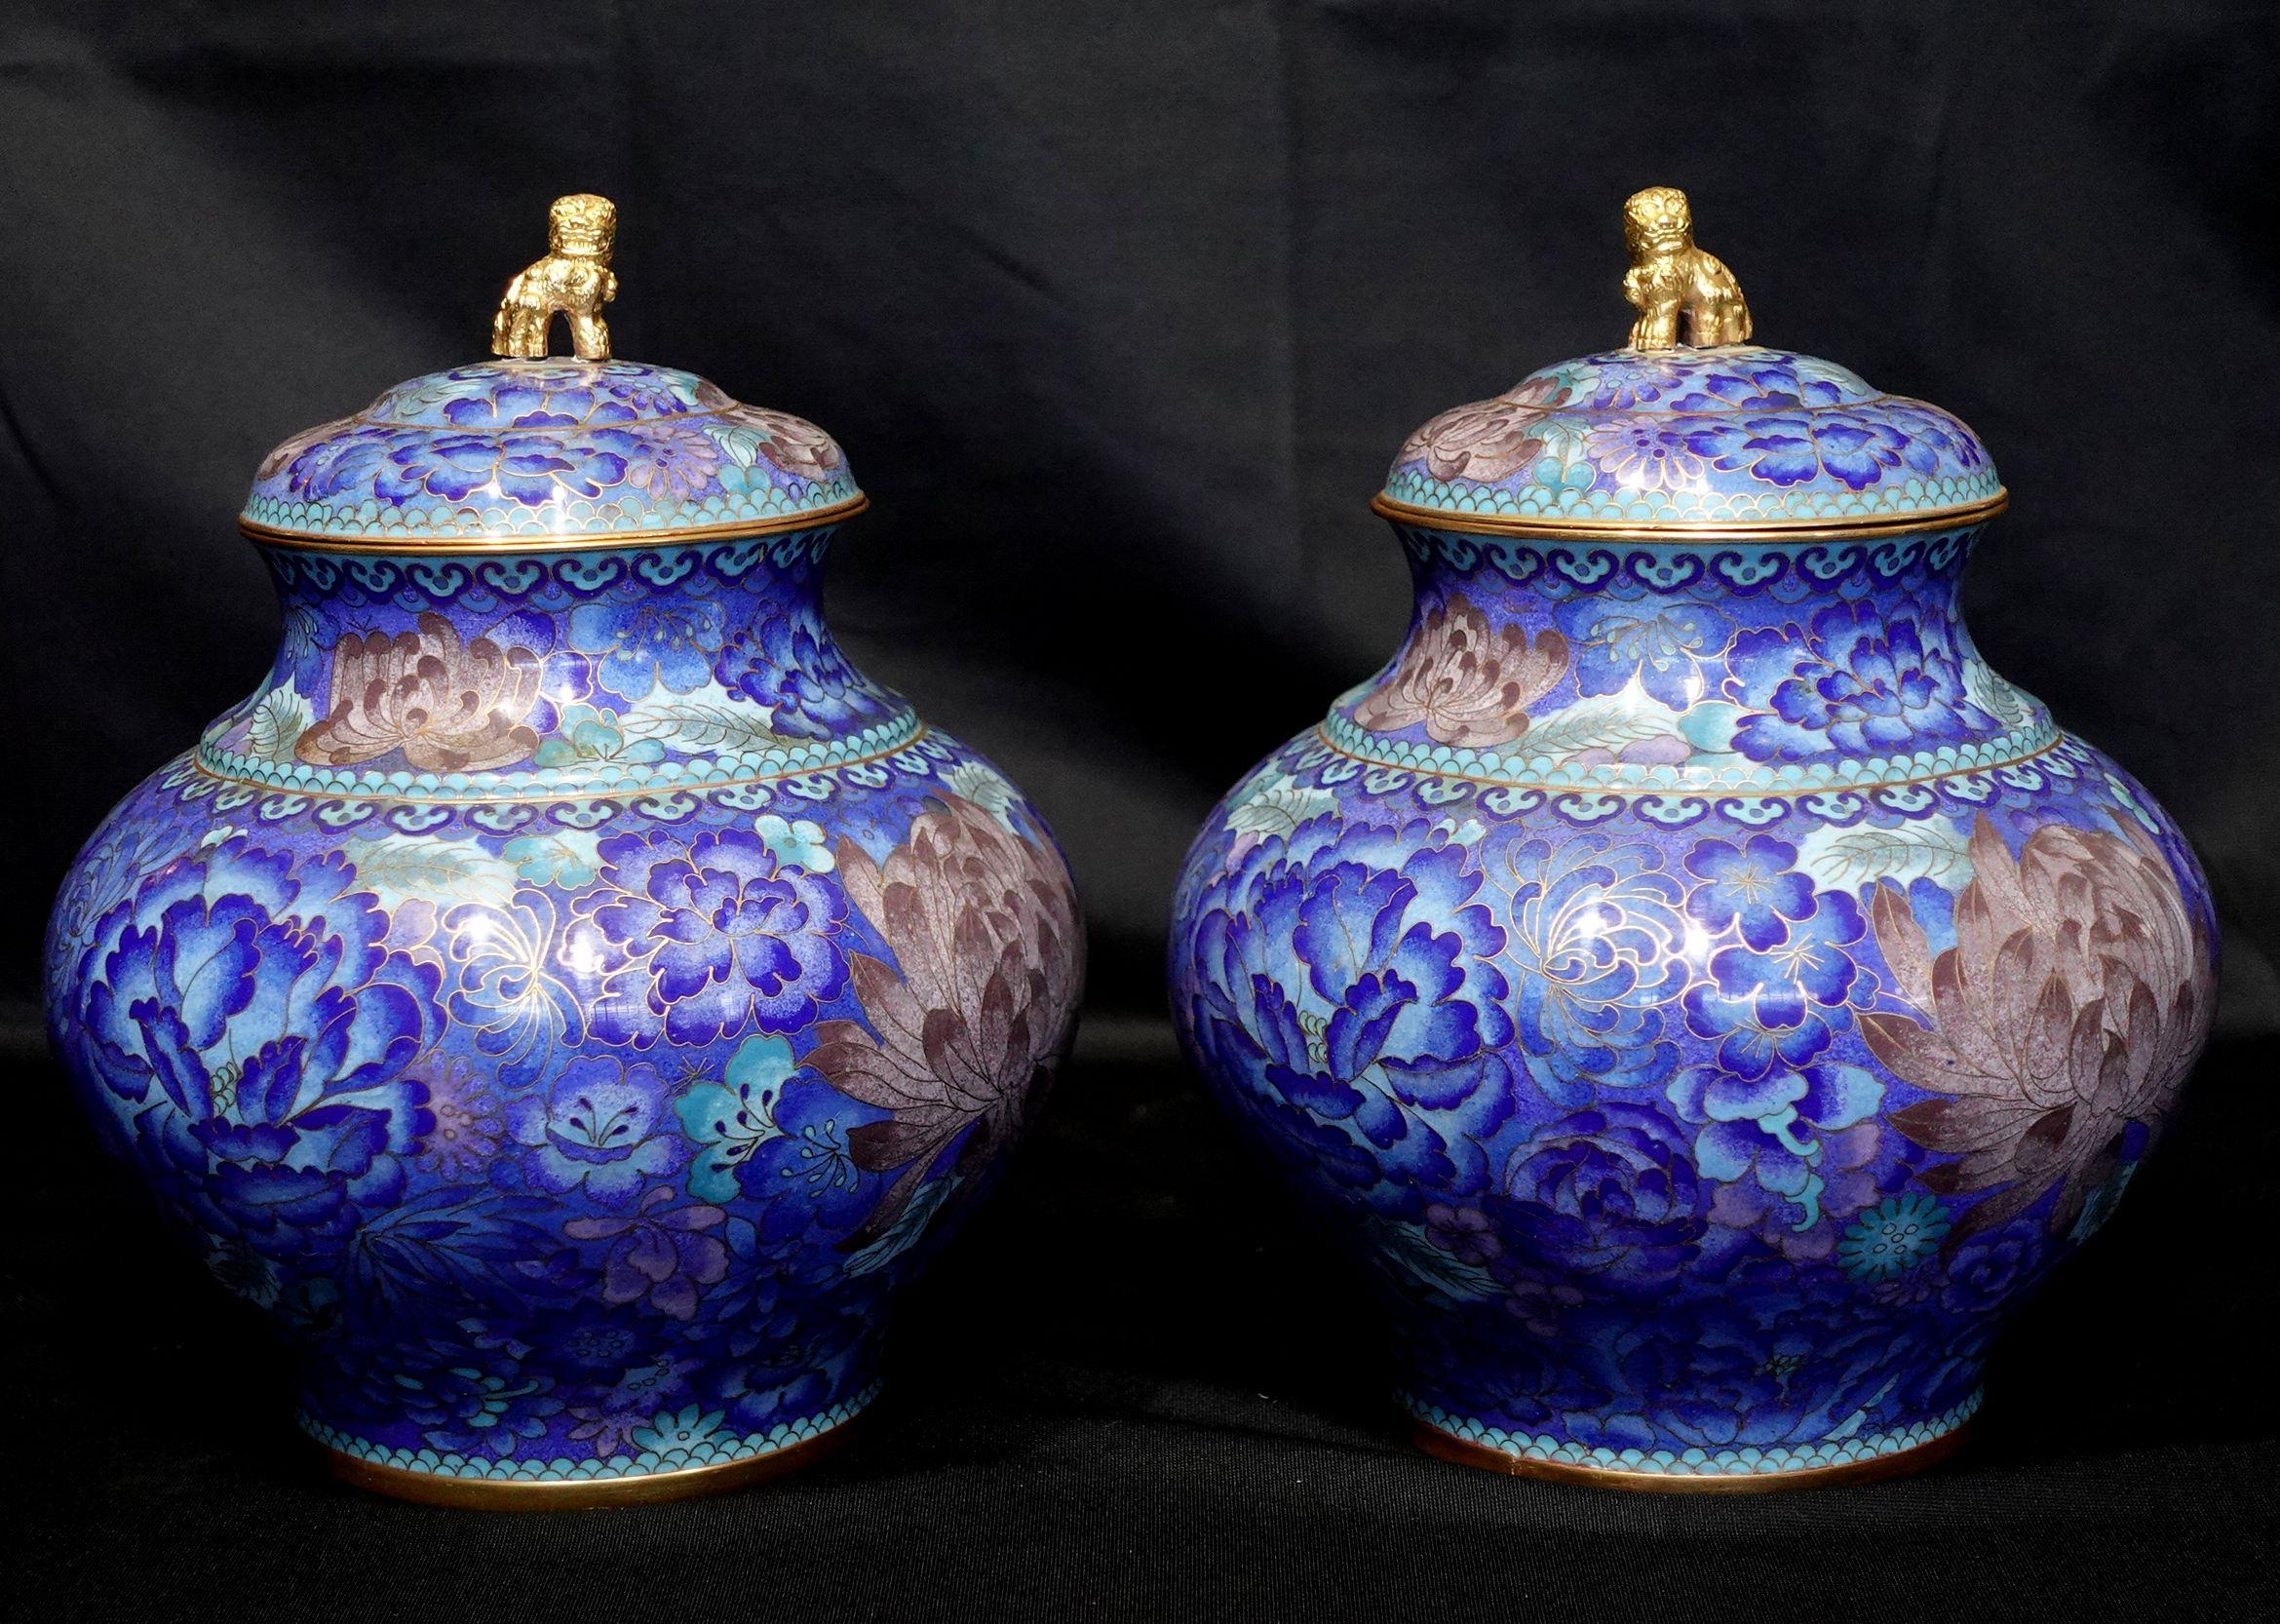 Quality work with amazing details is presented on this pair of Chinese bronze cloisonné enameled Lidded Jars depicting the scene of florals on a blue ground with vivid colors of blue, red-brown, and gold lion finales, very luxurious appearance with